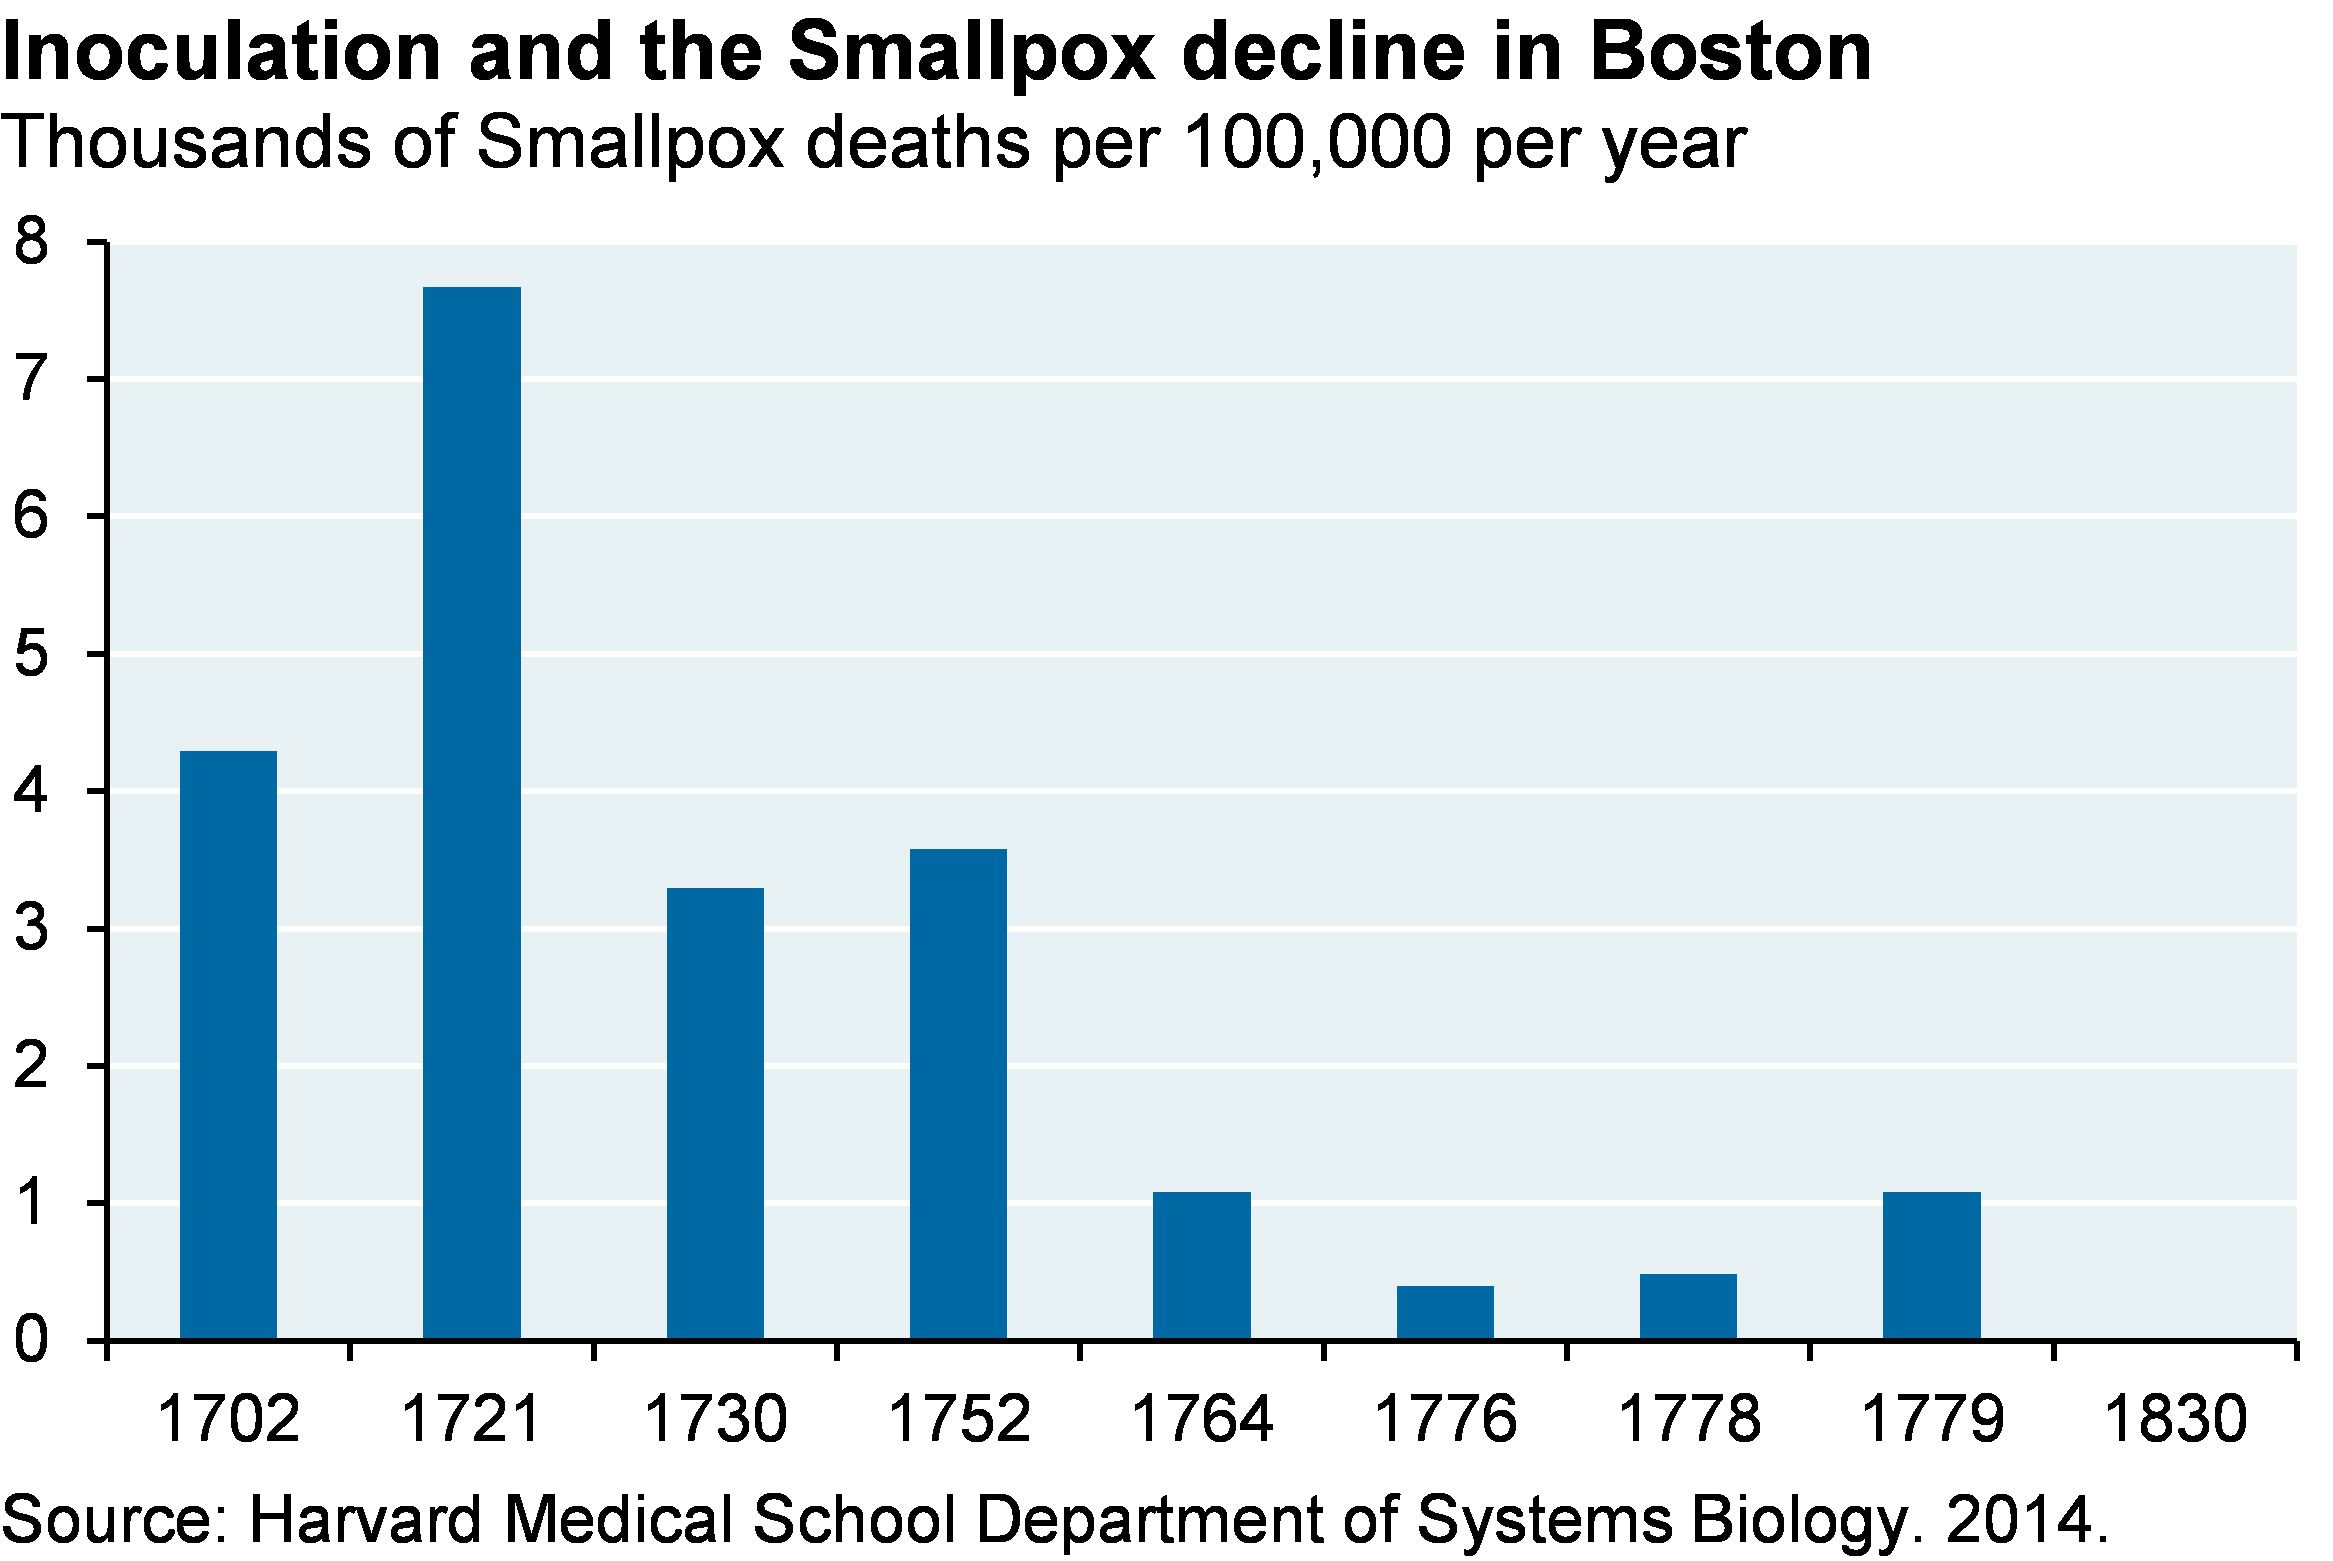 Bar chart which shows Smallpox deaths per 100,000 people per year in Boston from 1702 to 1830. The chart illustrates how after Washington’s inoculation mandate, Smallpox deaths in Boston fell to close to zero.